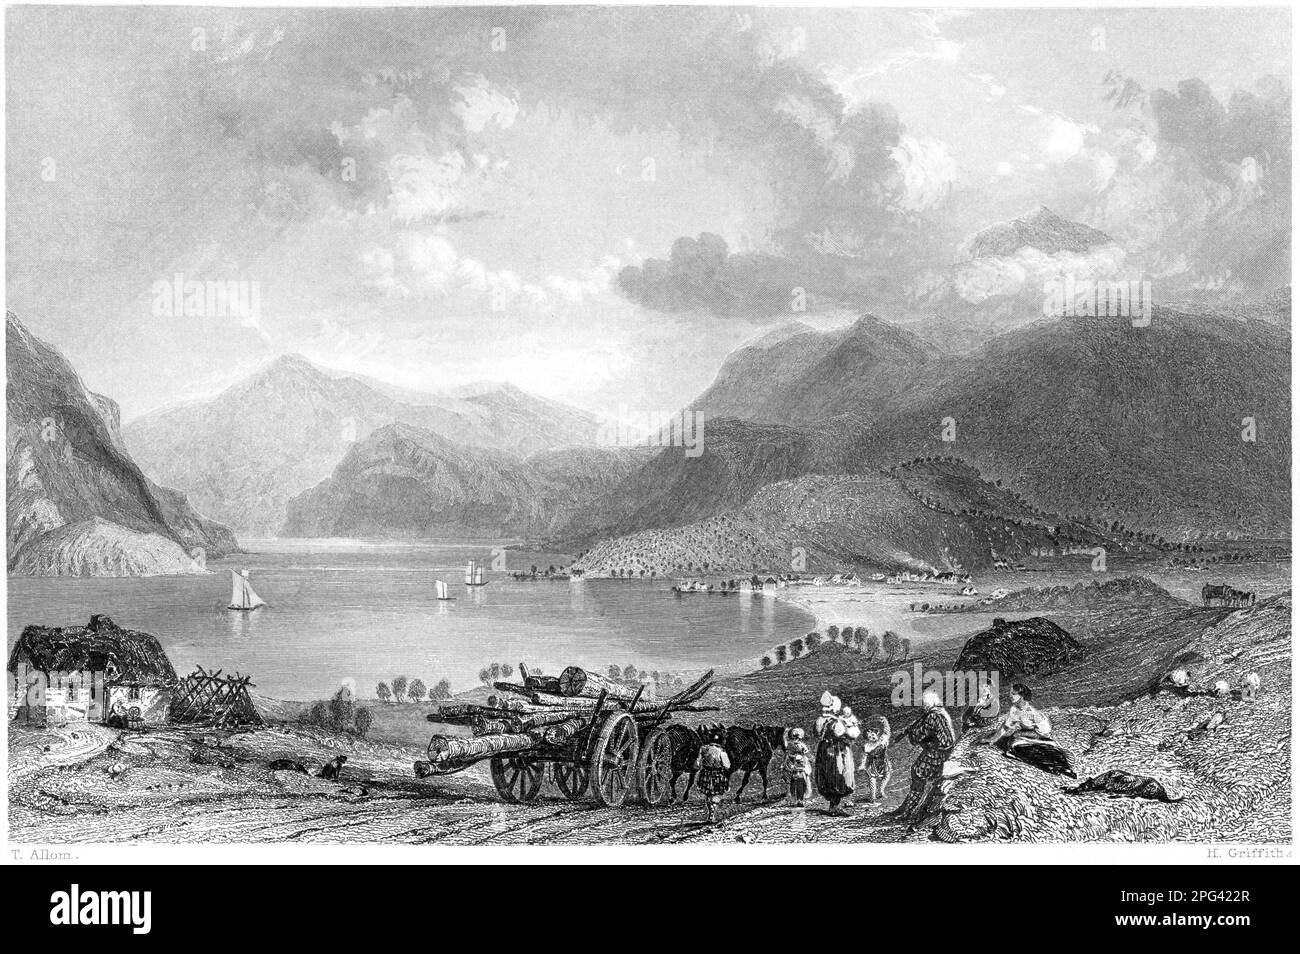 An engraving of Bunawe (Bonawe), Loch Etive from near Tyanuilt (Taynuilt), Argyleshire, Scotland UK scanned at high res from a book printed in 1840. Stock Photo